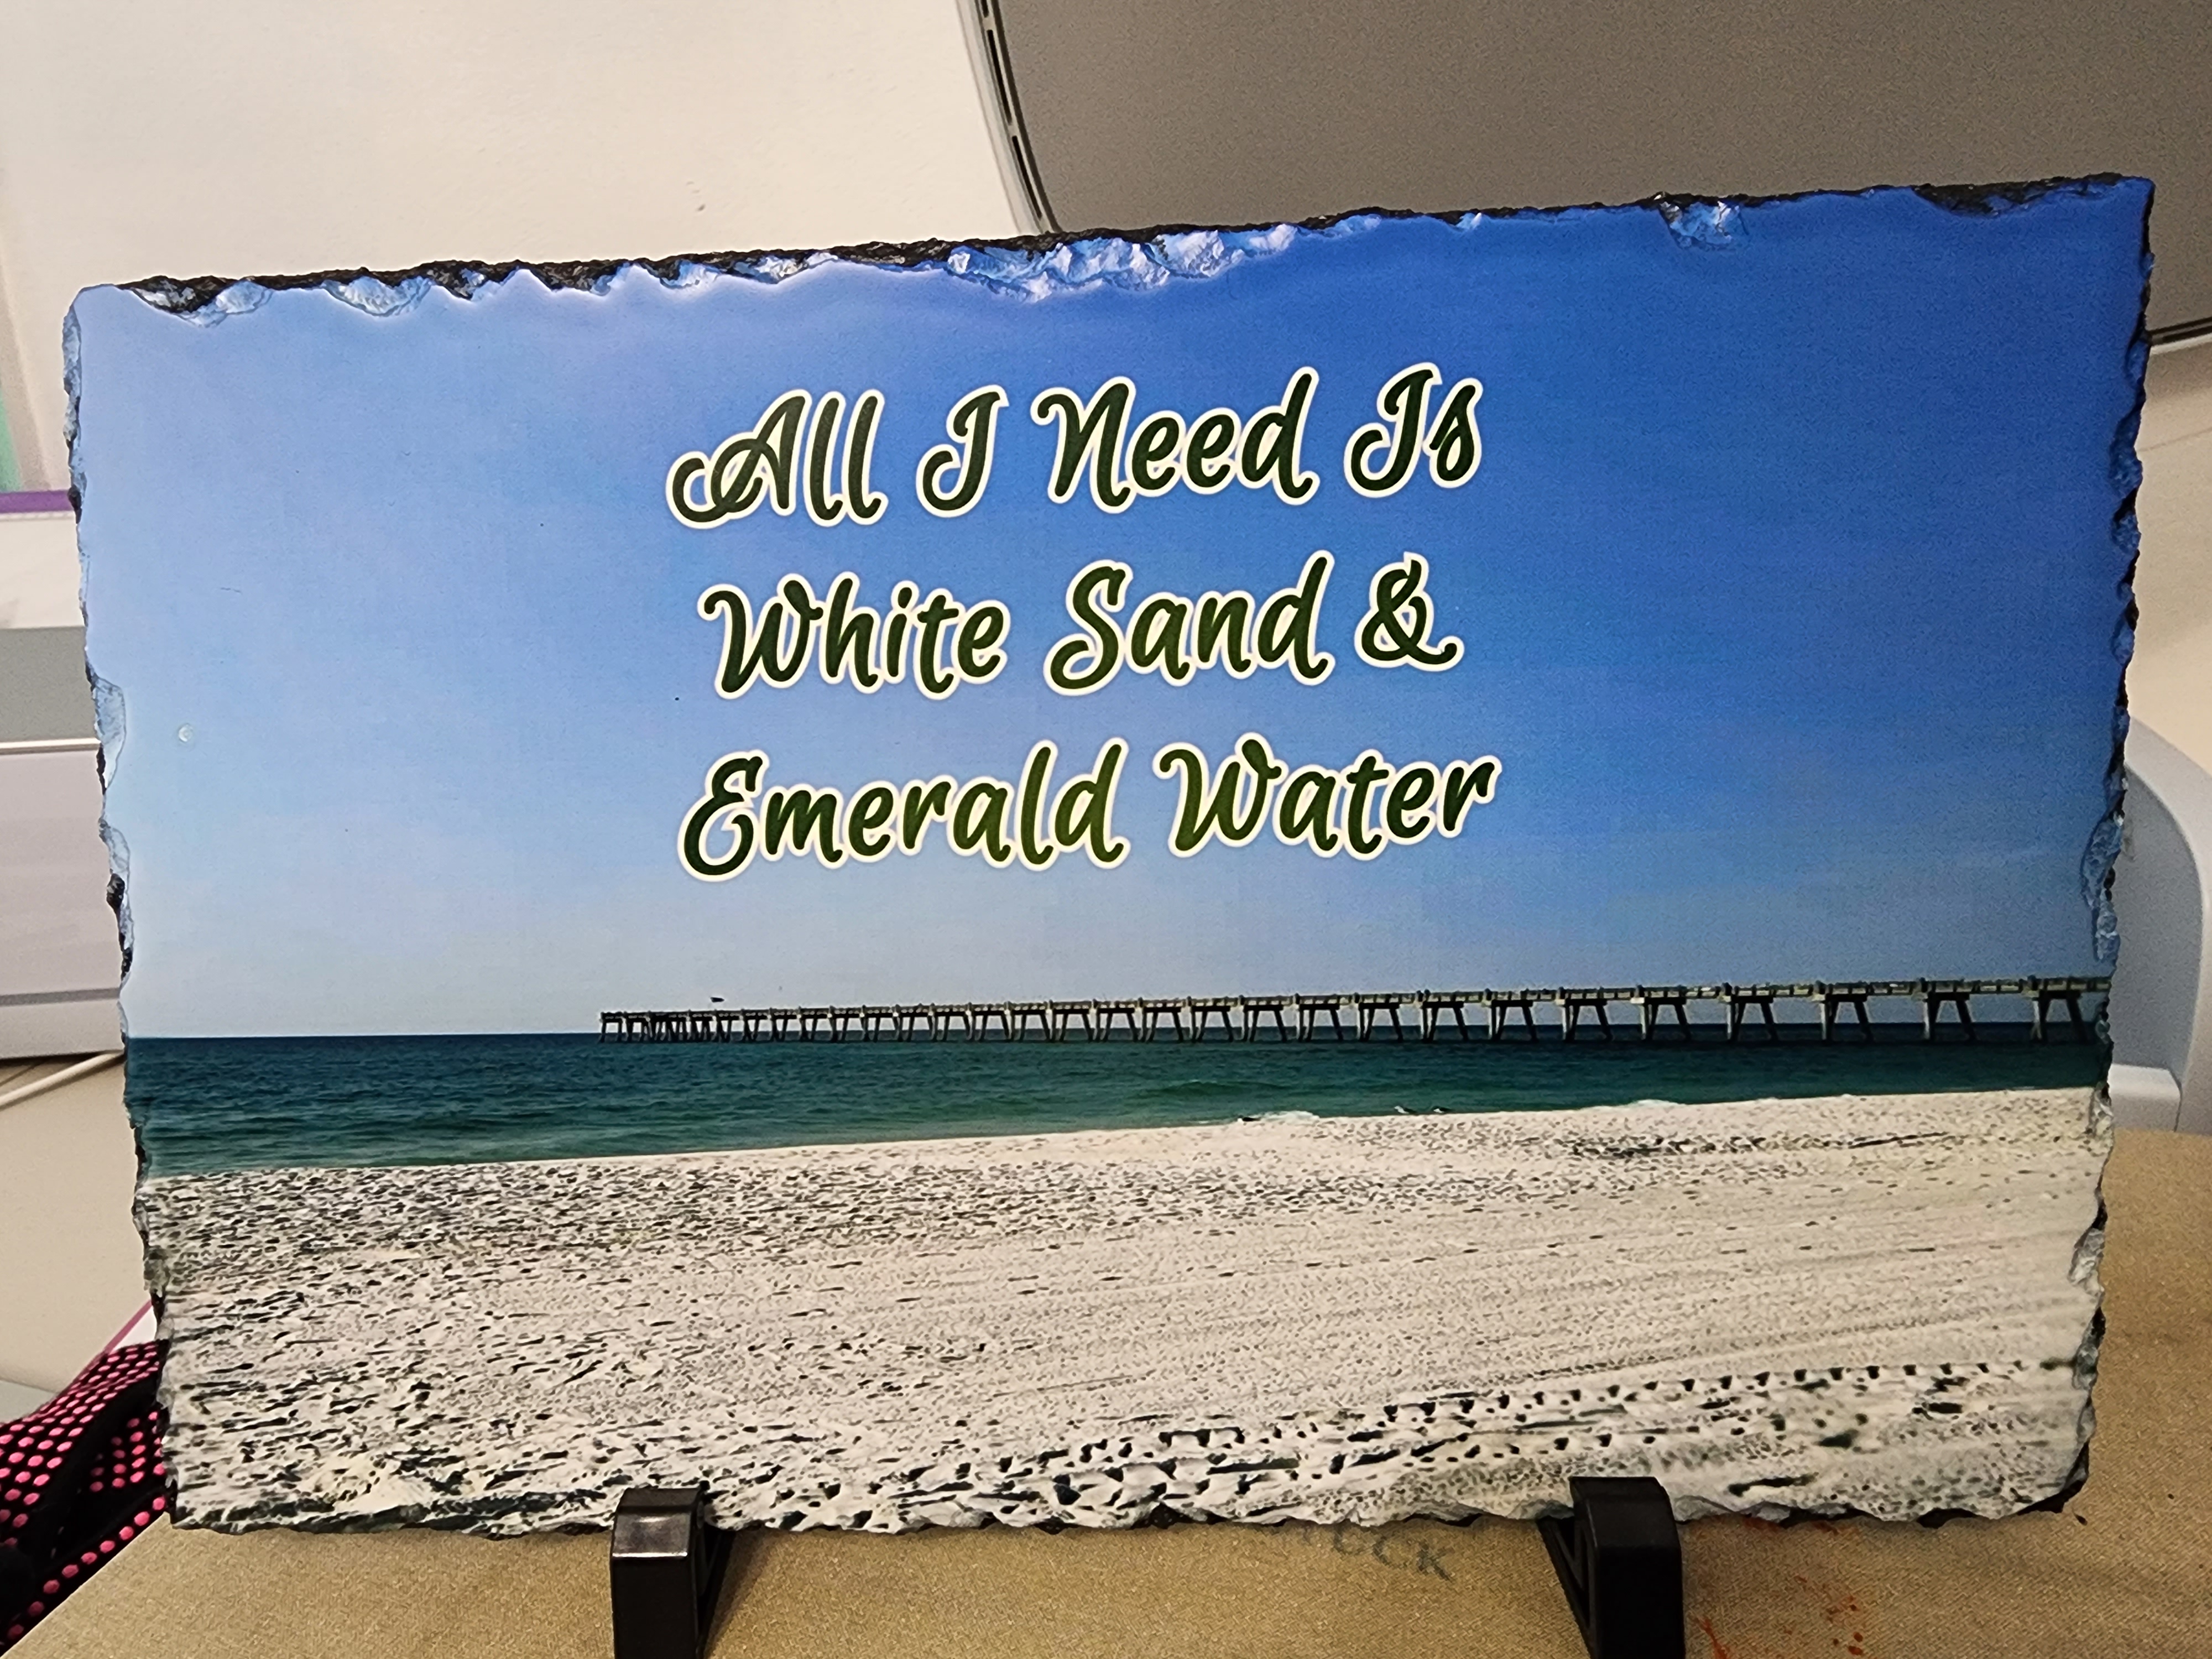 I recently spent some time vacationing in Pensacola, FL, and I just loved it! I used a picture 